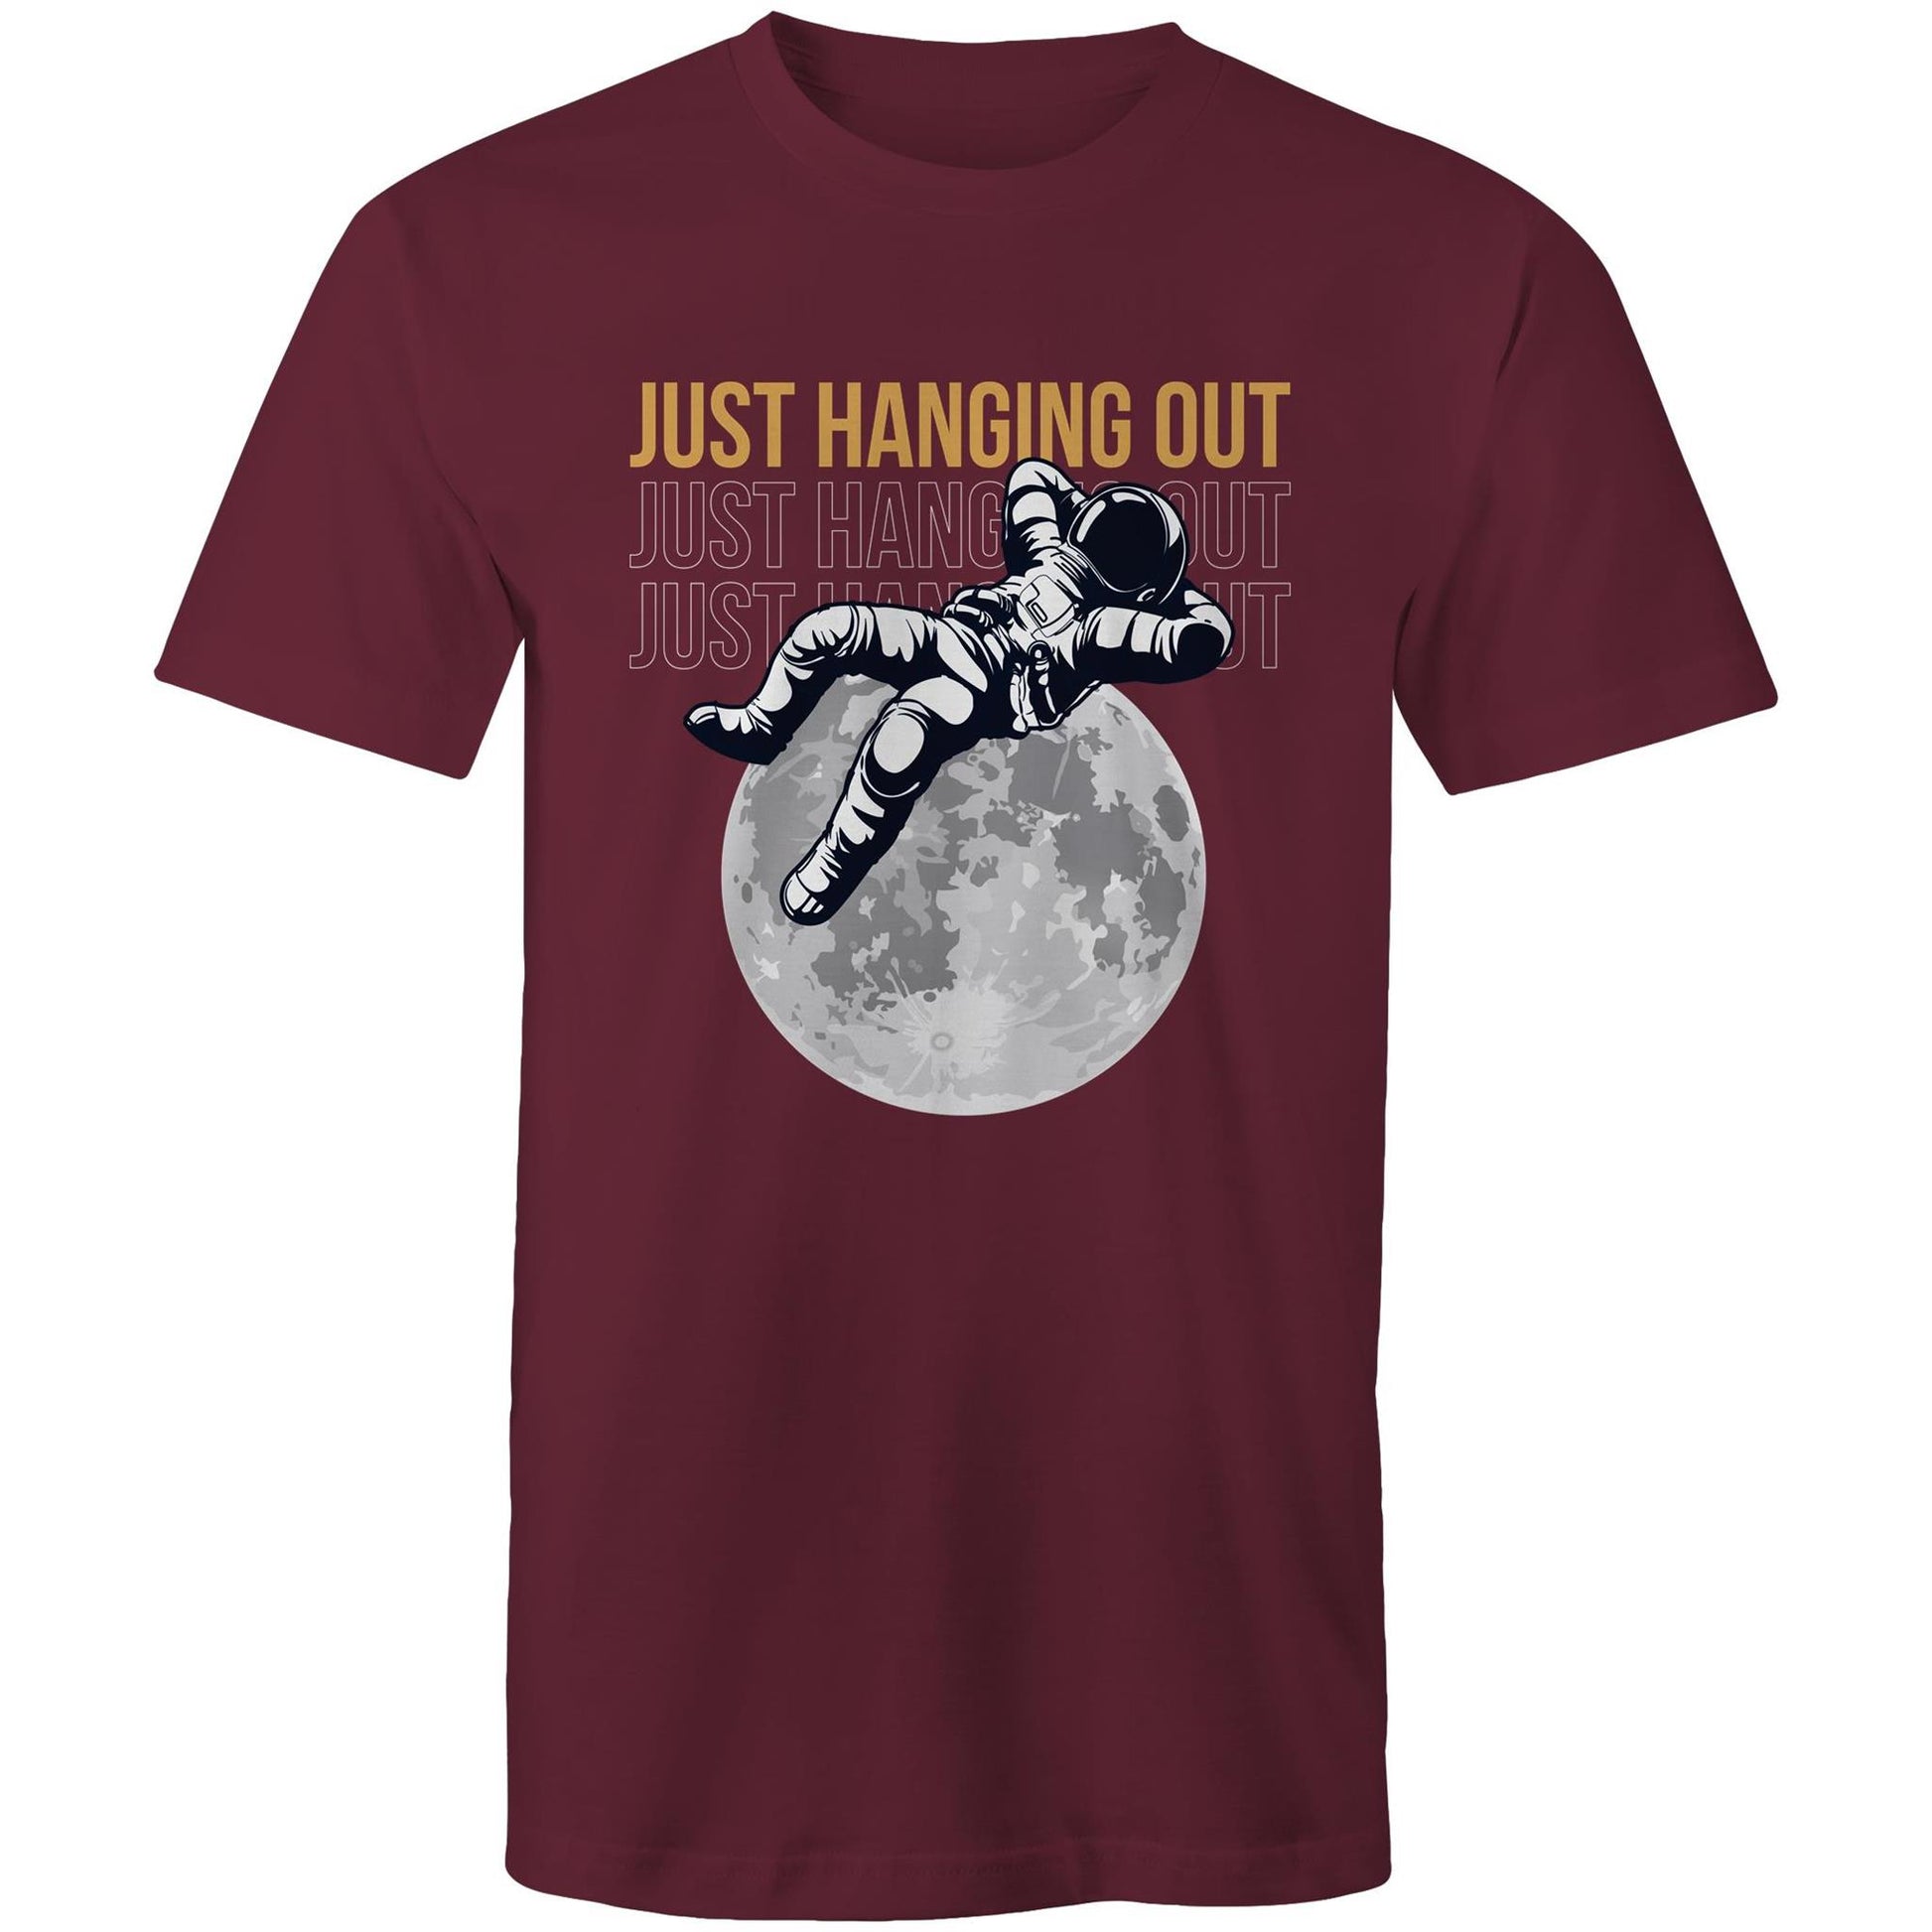 Just Hanging Out - Mens T-Shirt Burgundy Mens T-shirt Space